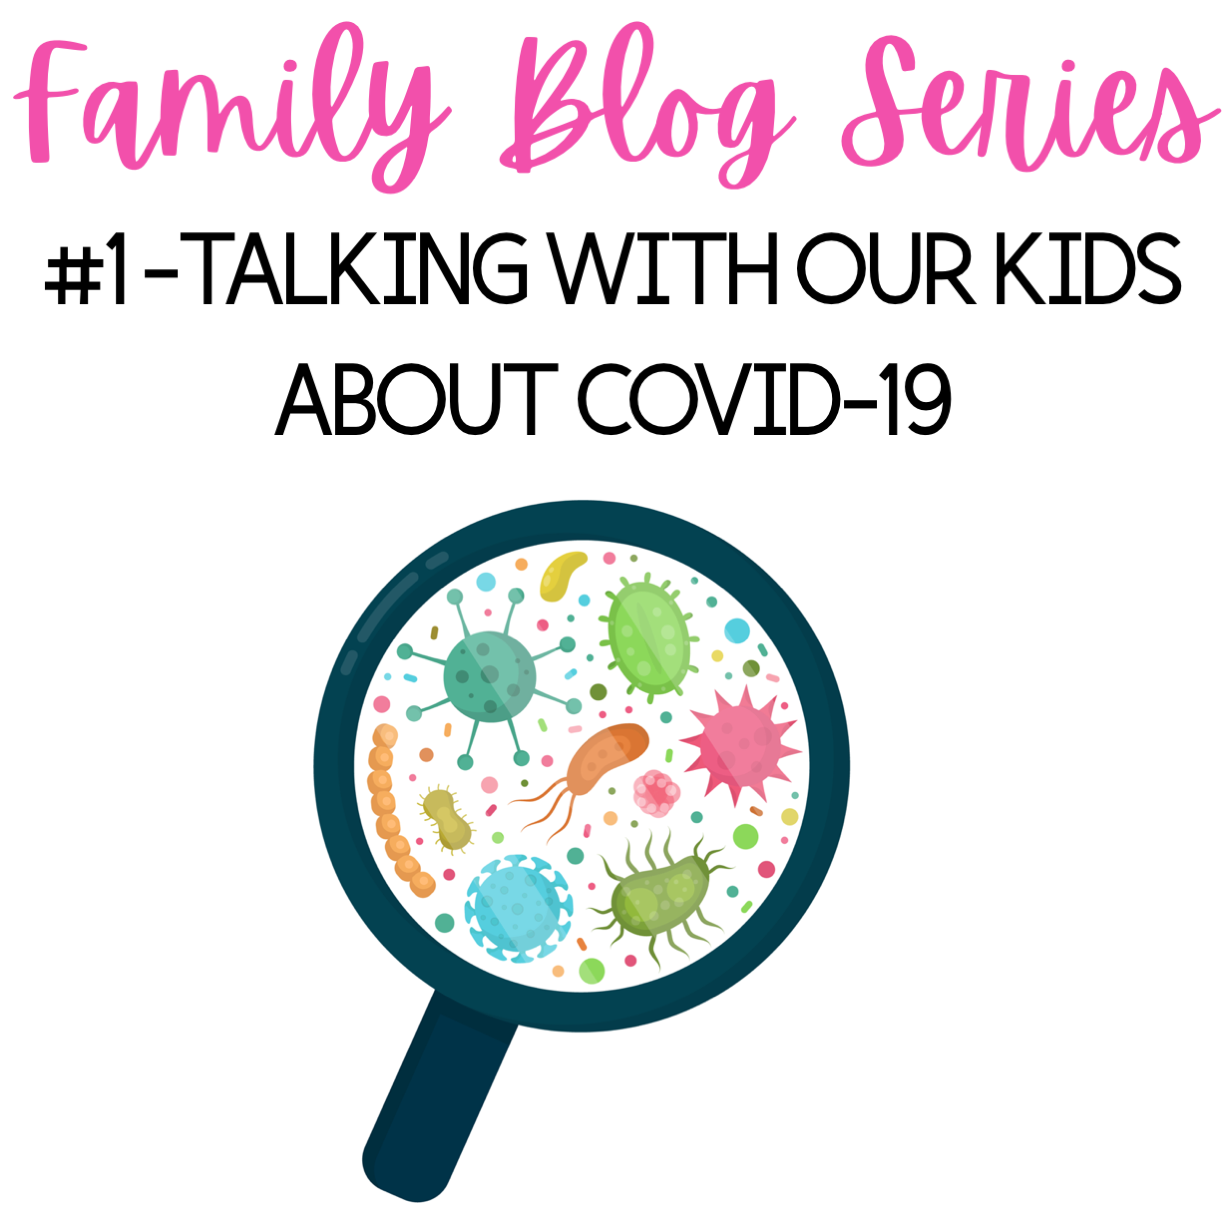 Talkng to our kids about Covid